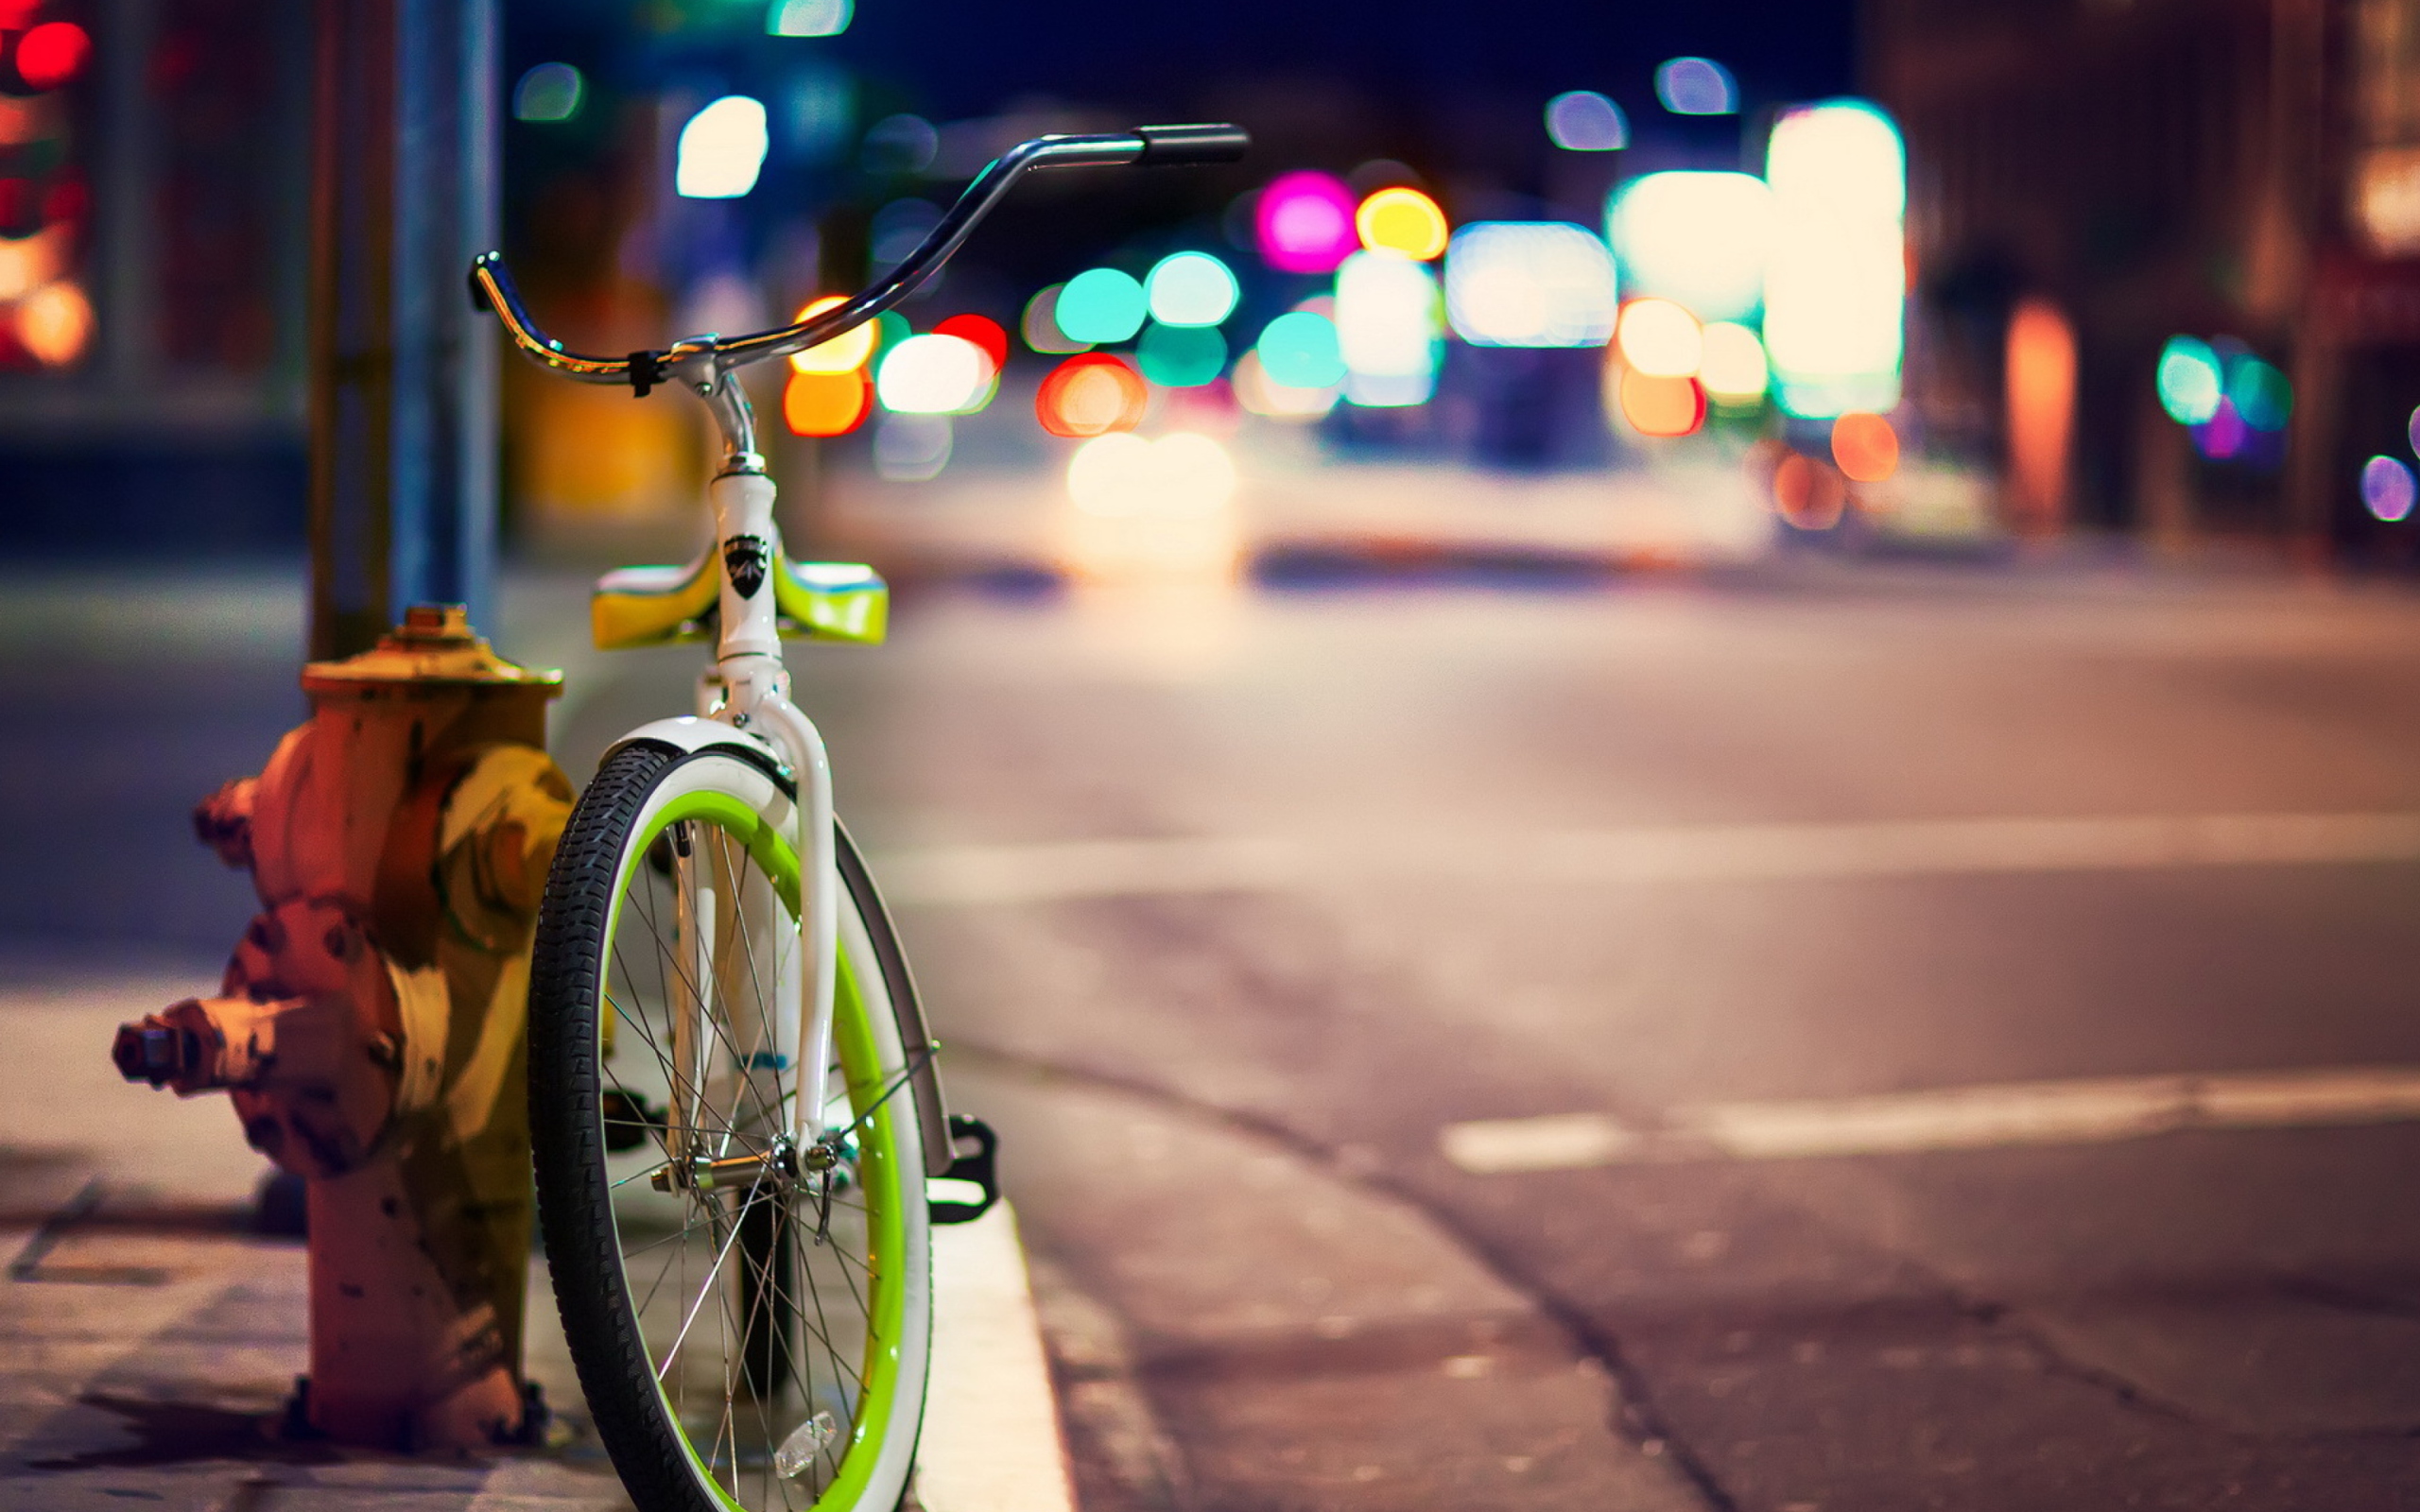 Green Bicycle In City Lights wallpaper 2560x1600